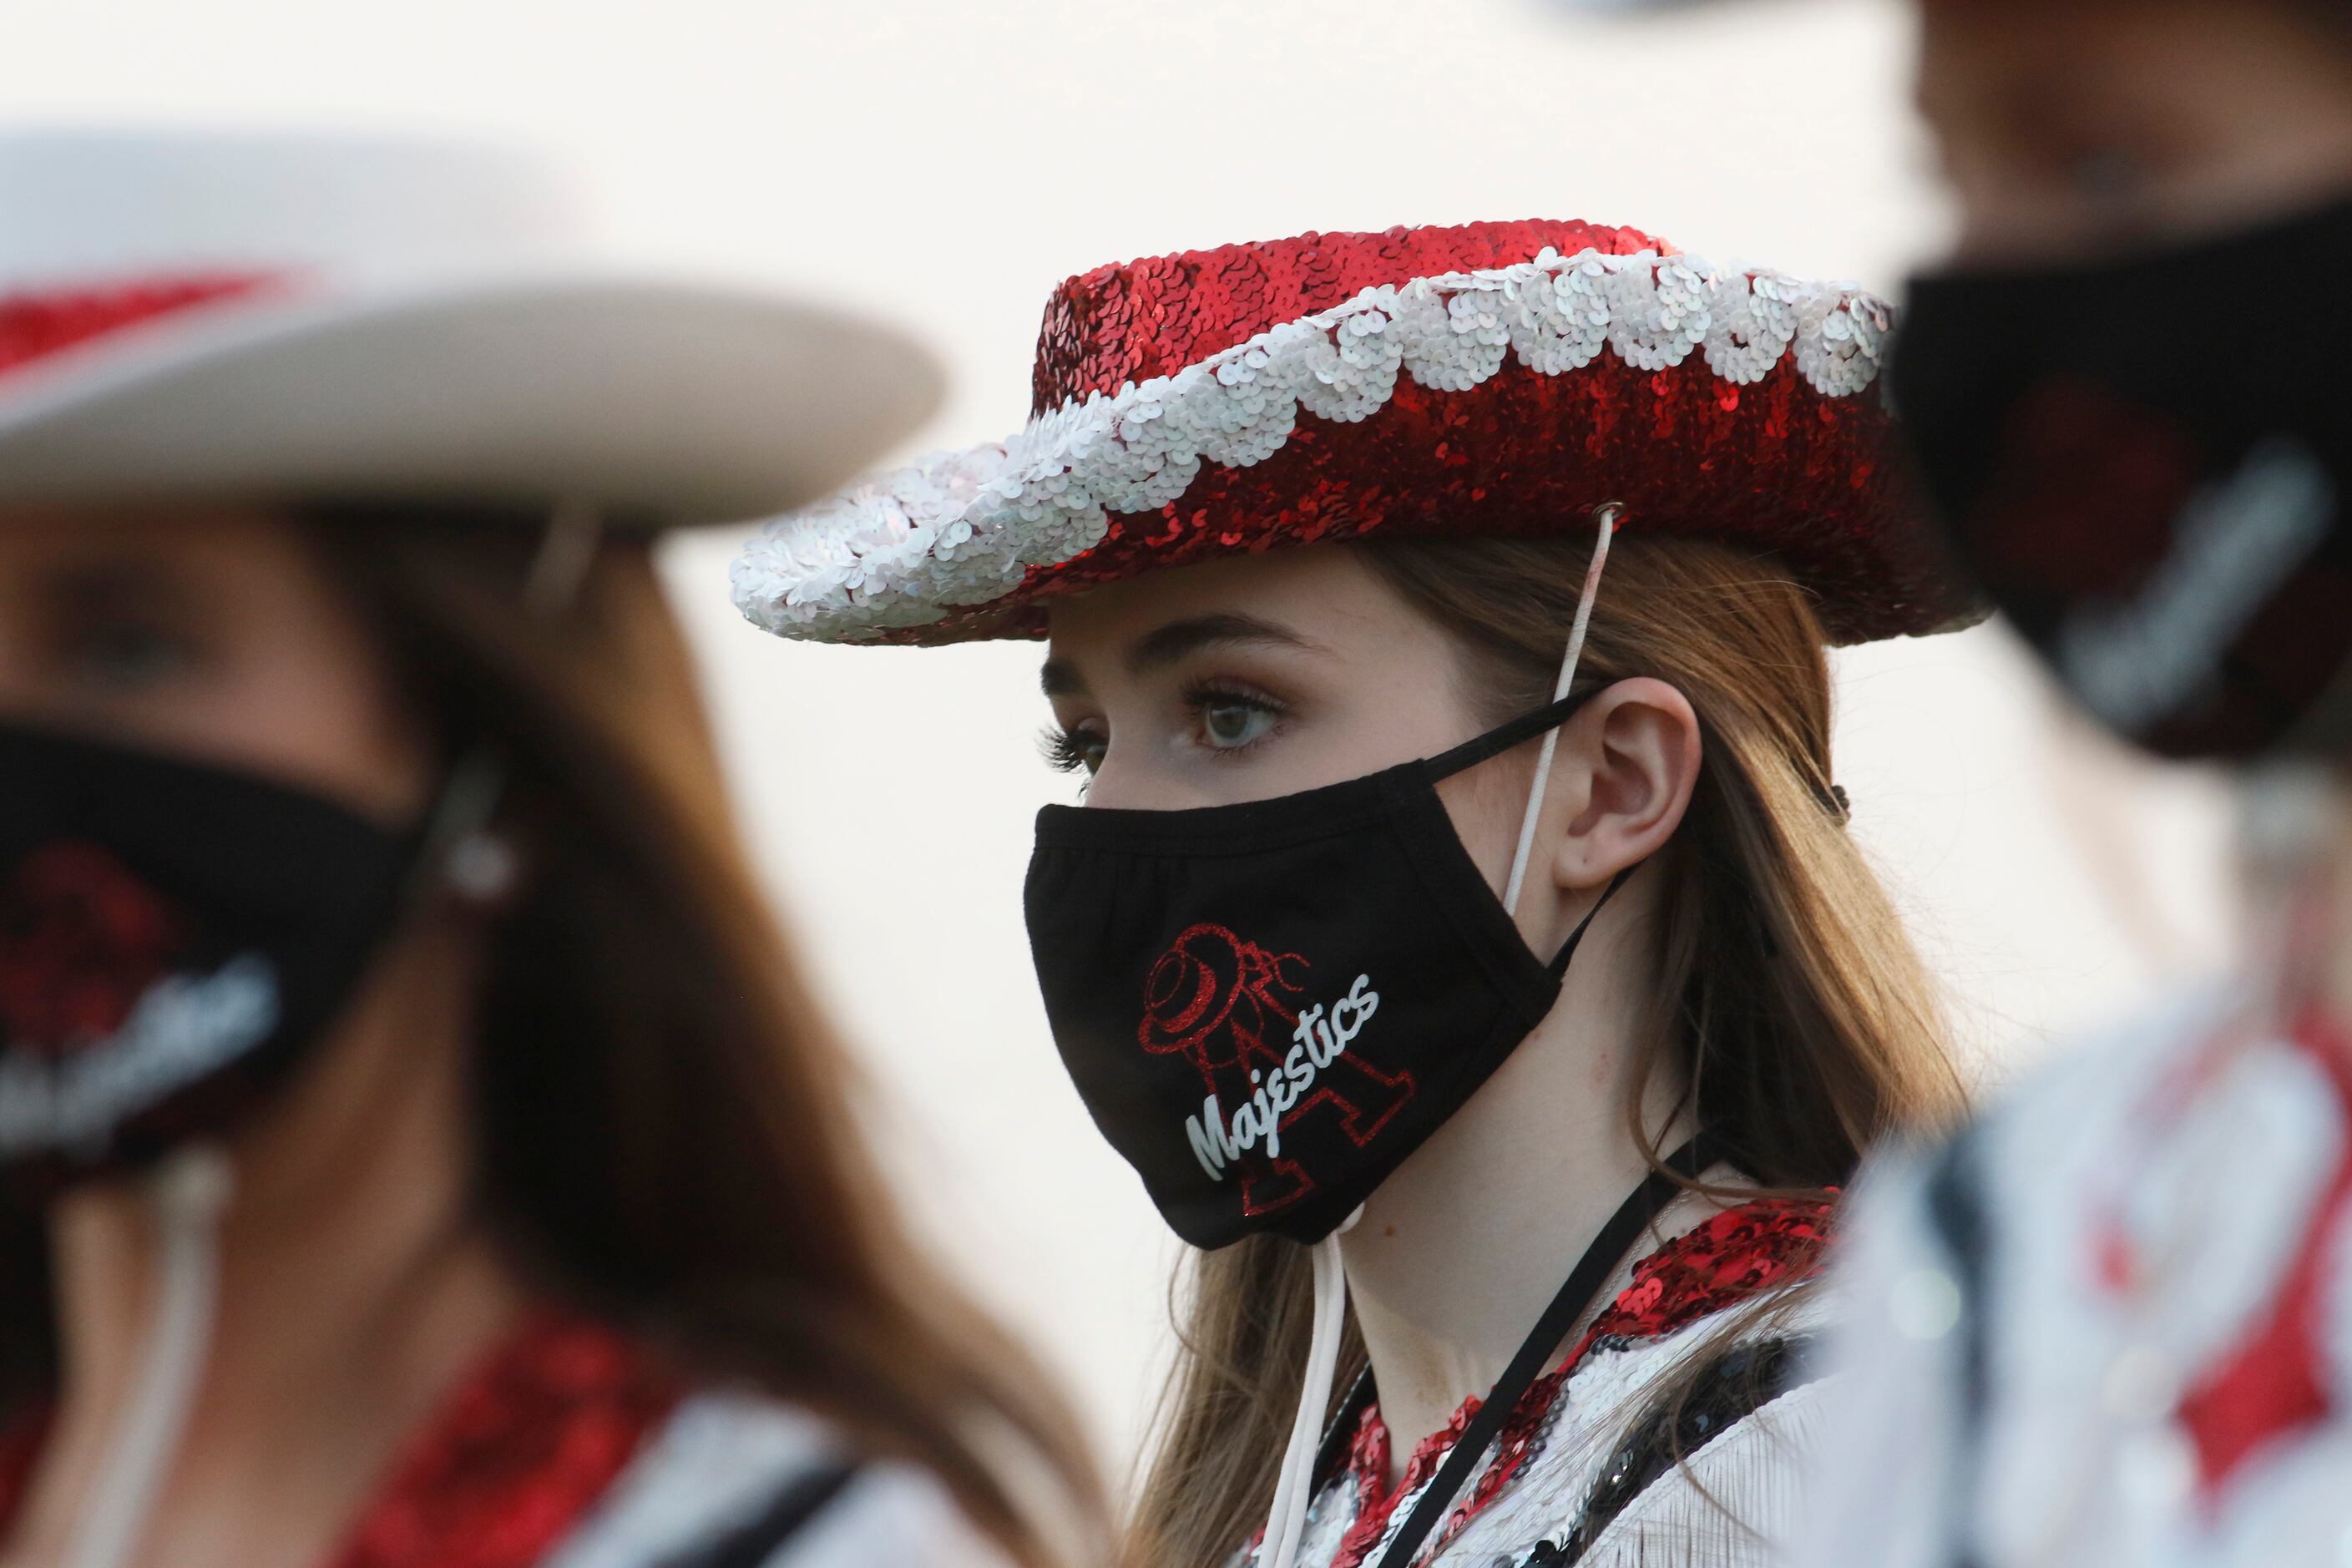 Members of the Argyle drill team don face coverings as they await their field performance...